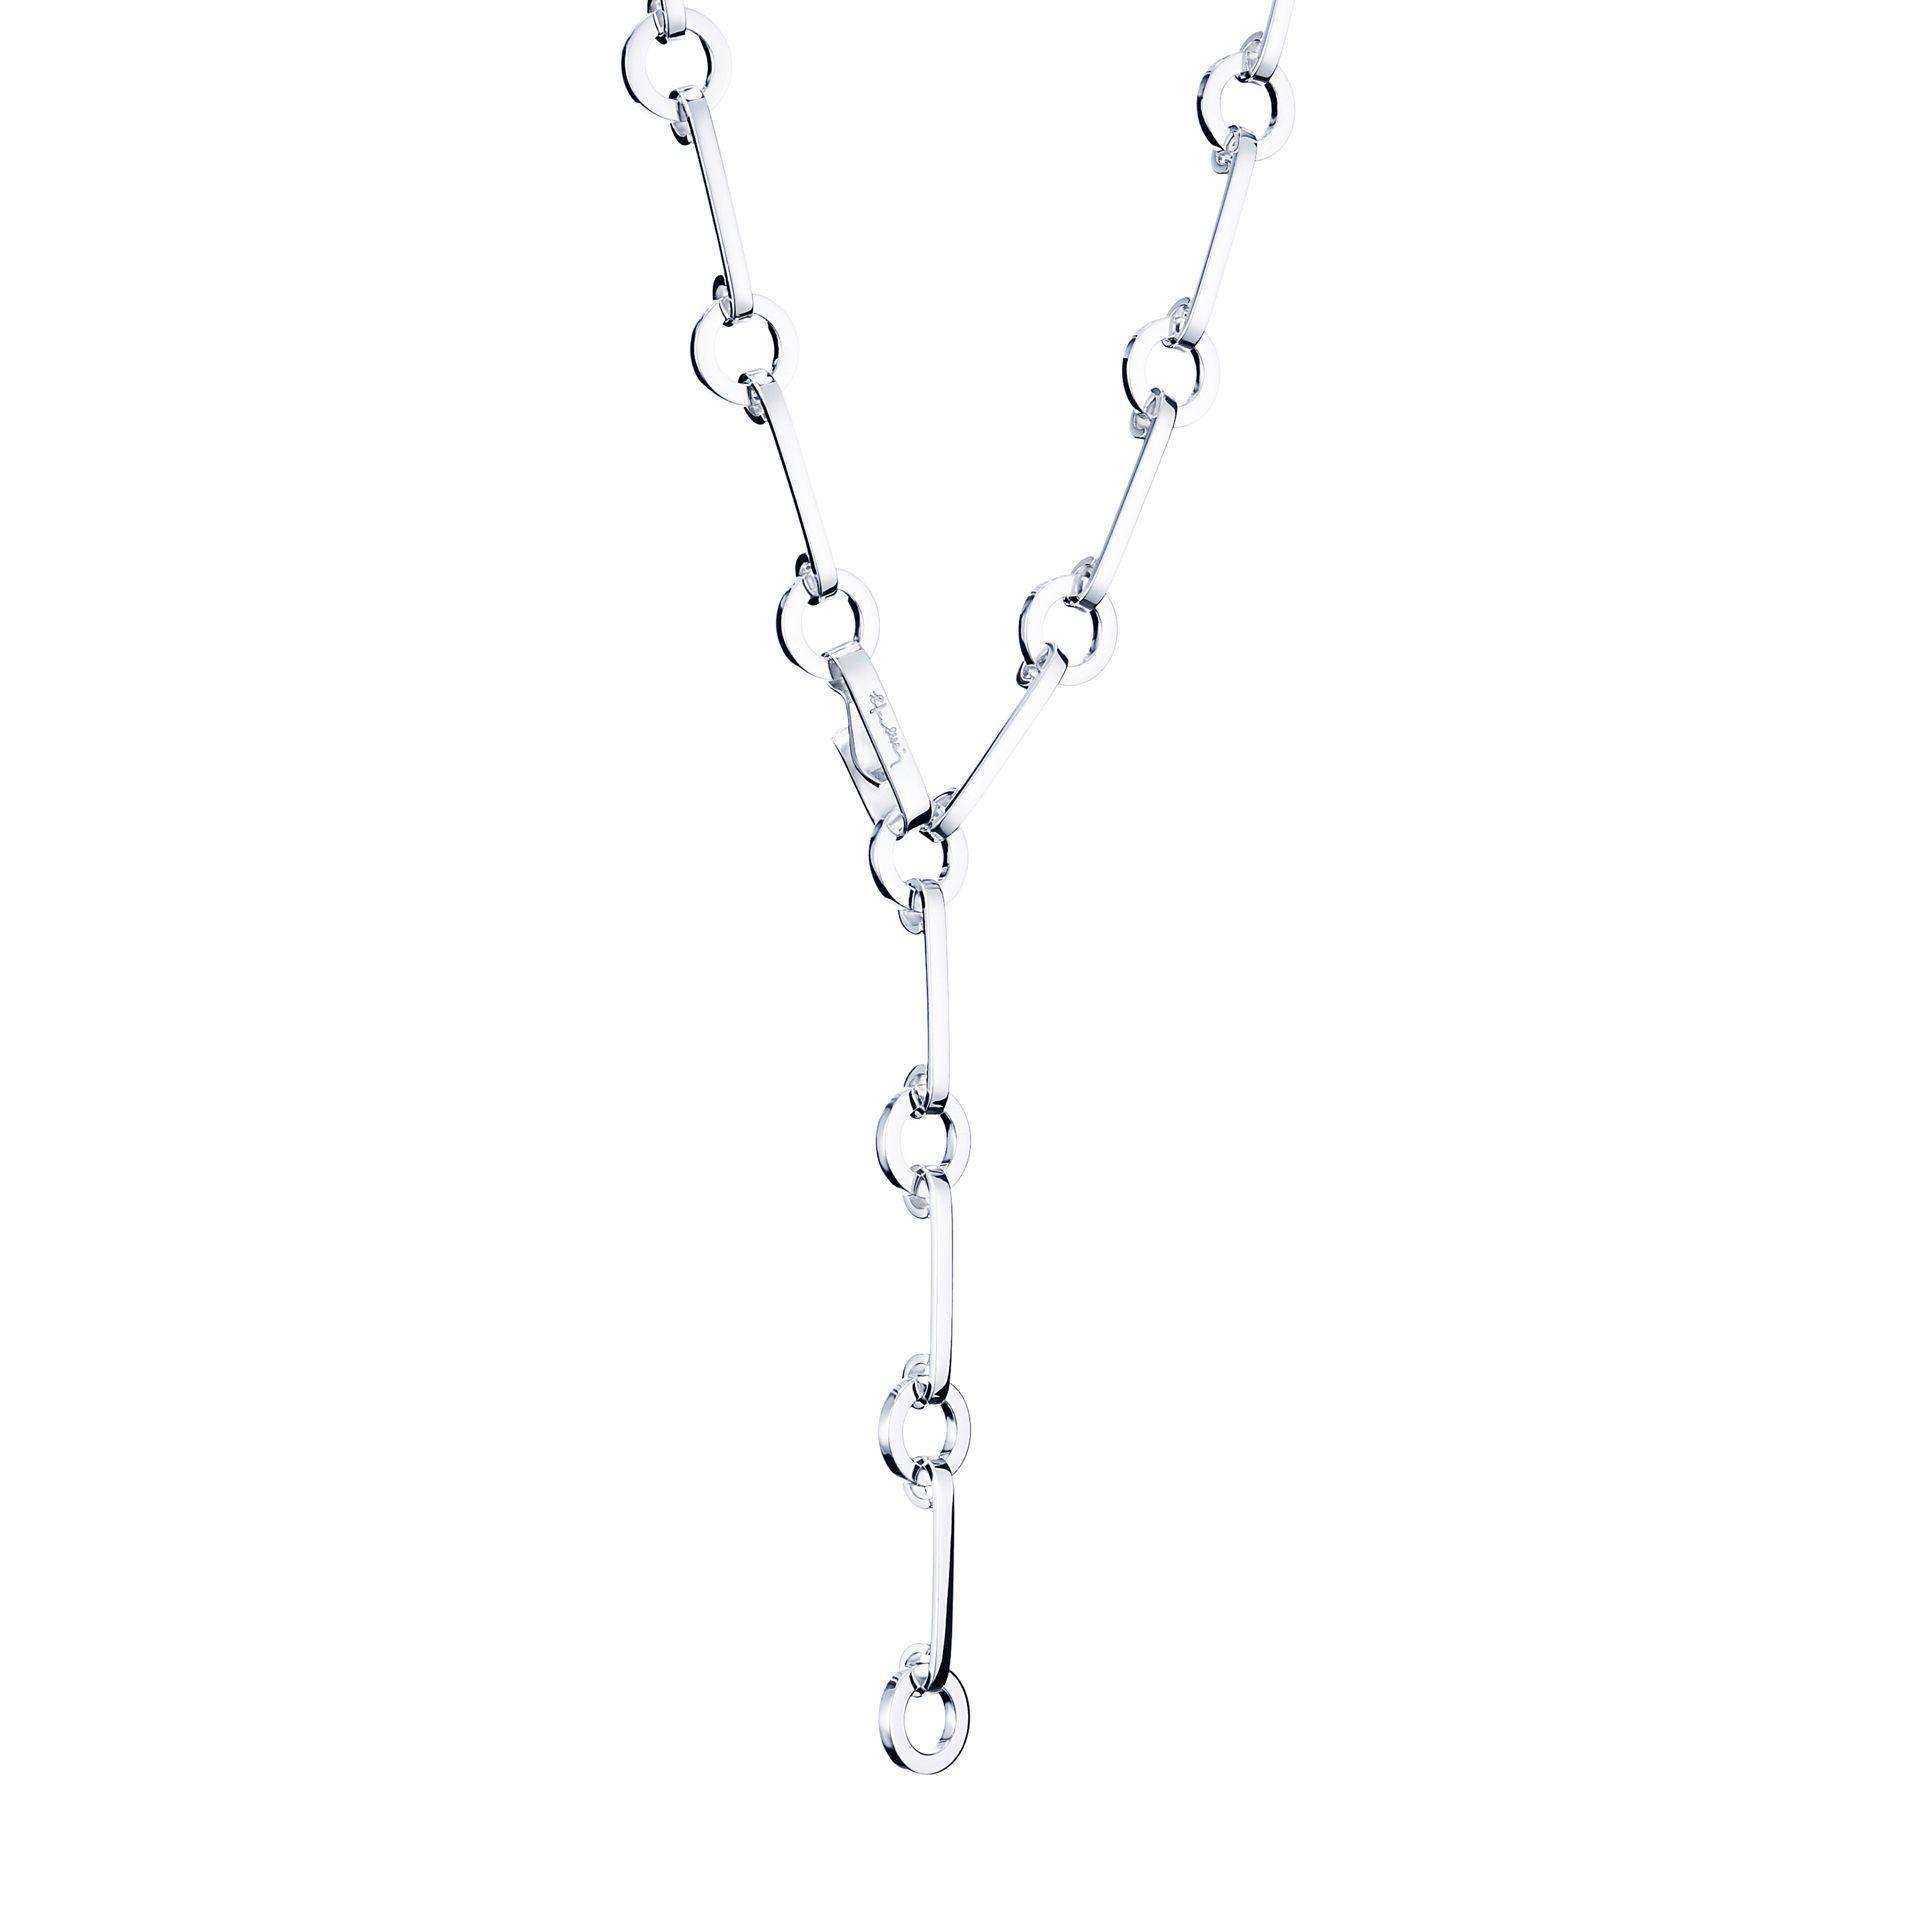 Ring Chain Collier